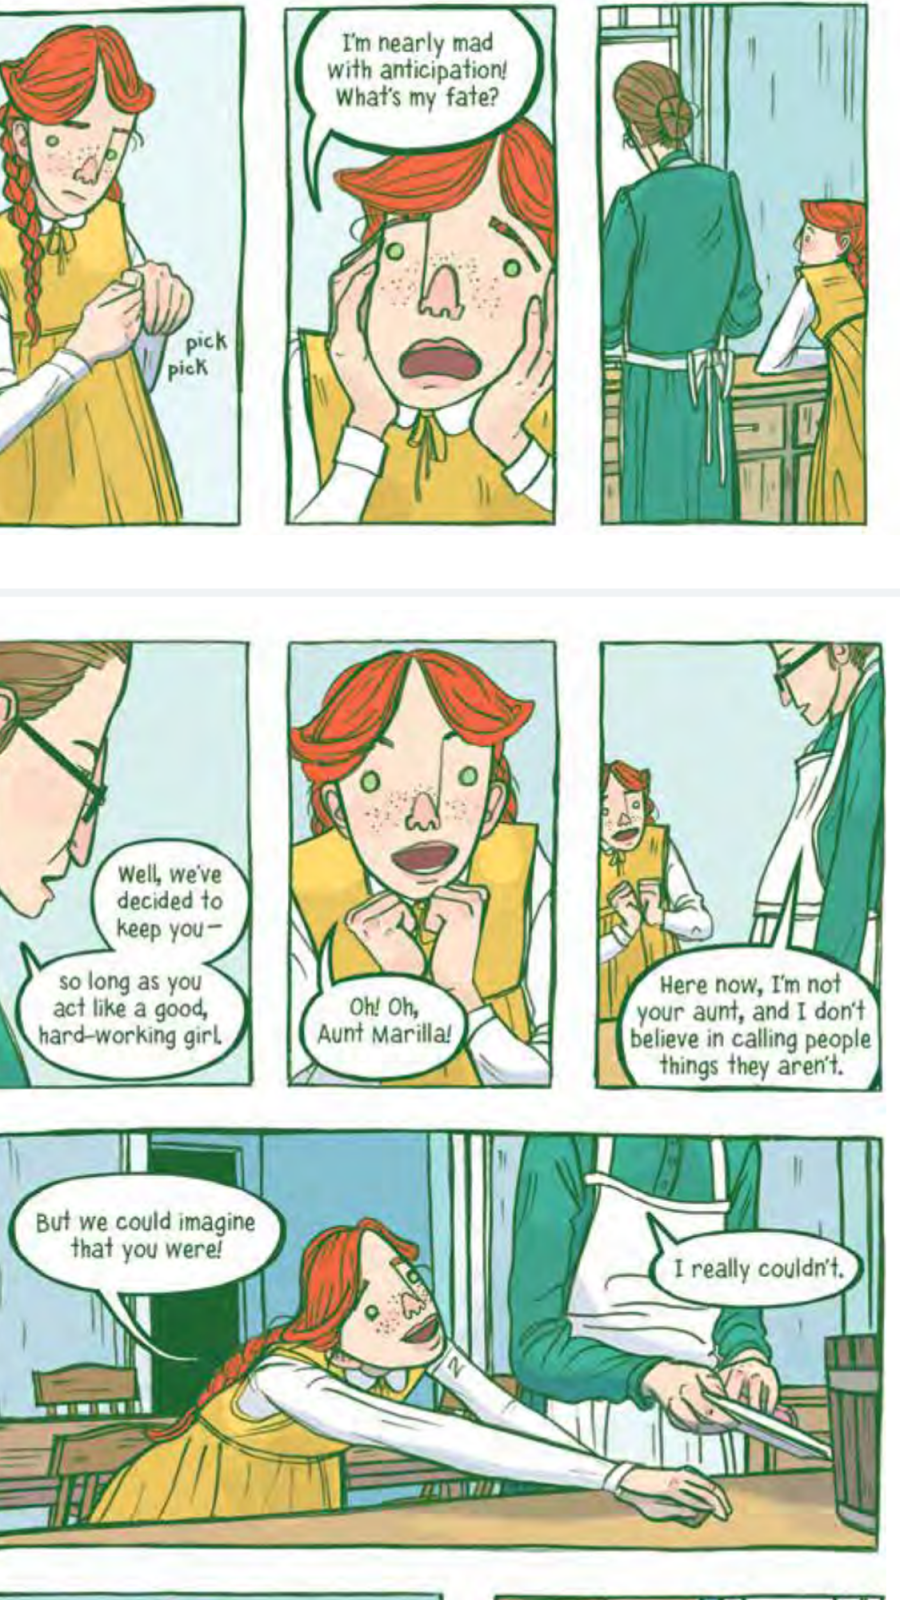 Anne of Green Gables A Graphic Novel